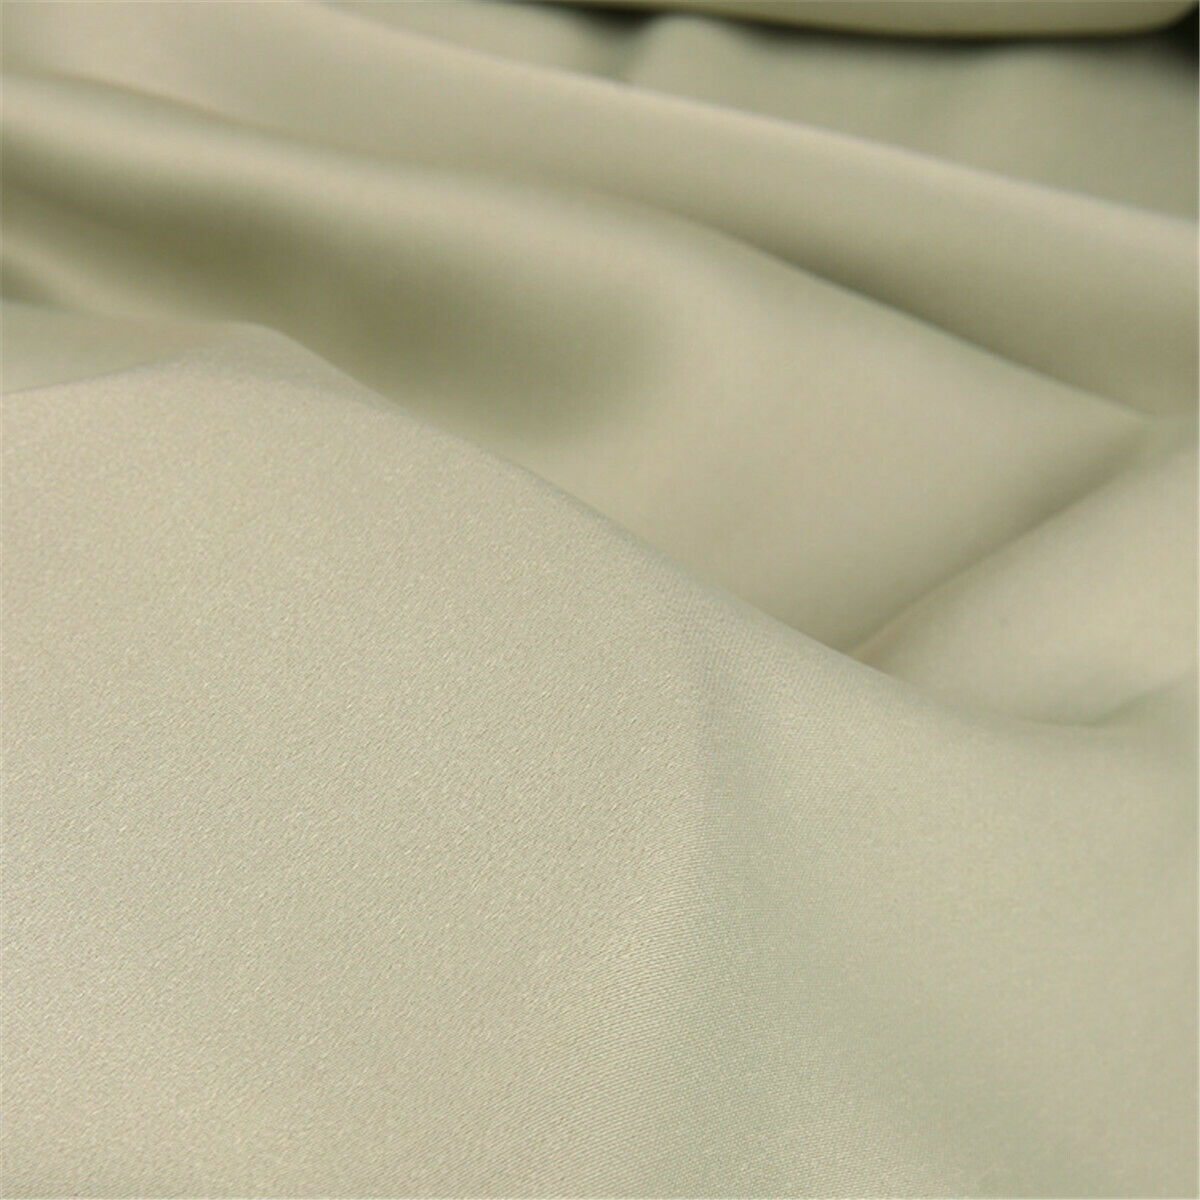 100*150CM Acetate Wall Satin French Shirt Dress Clothing Fabric Embroidered DIY